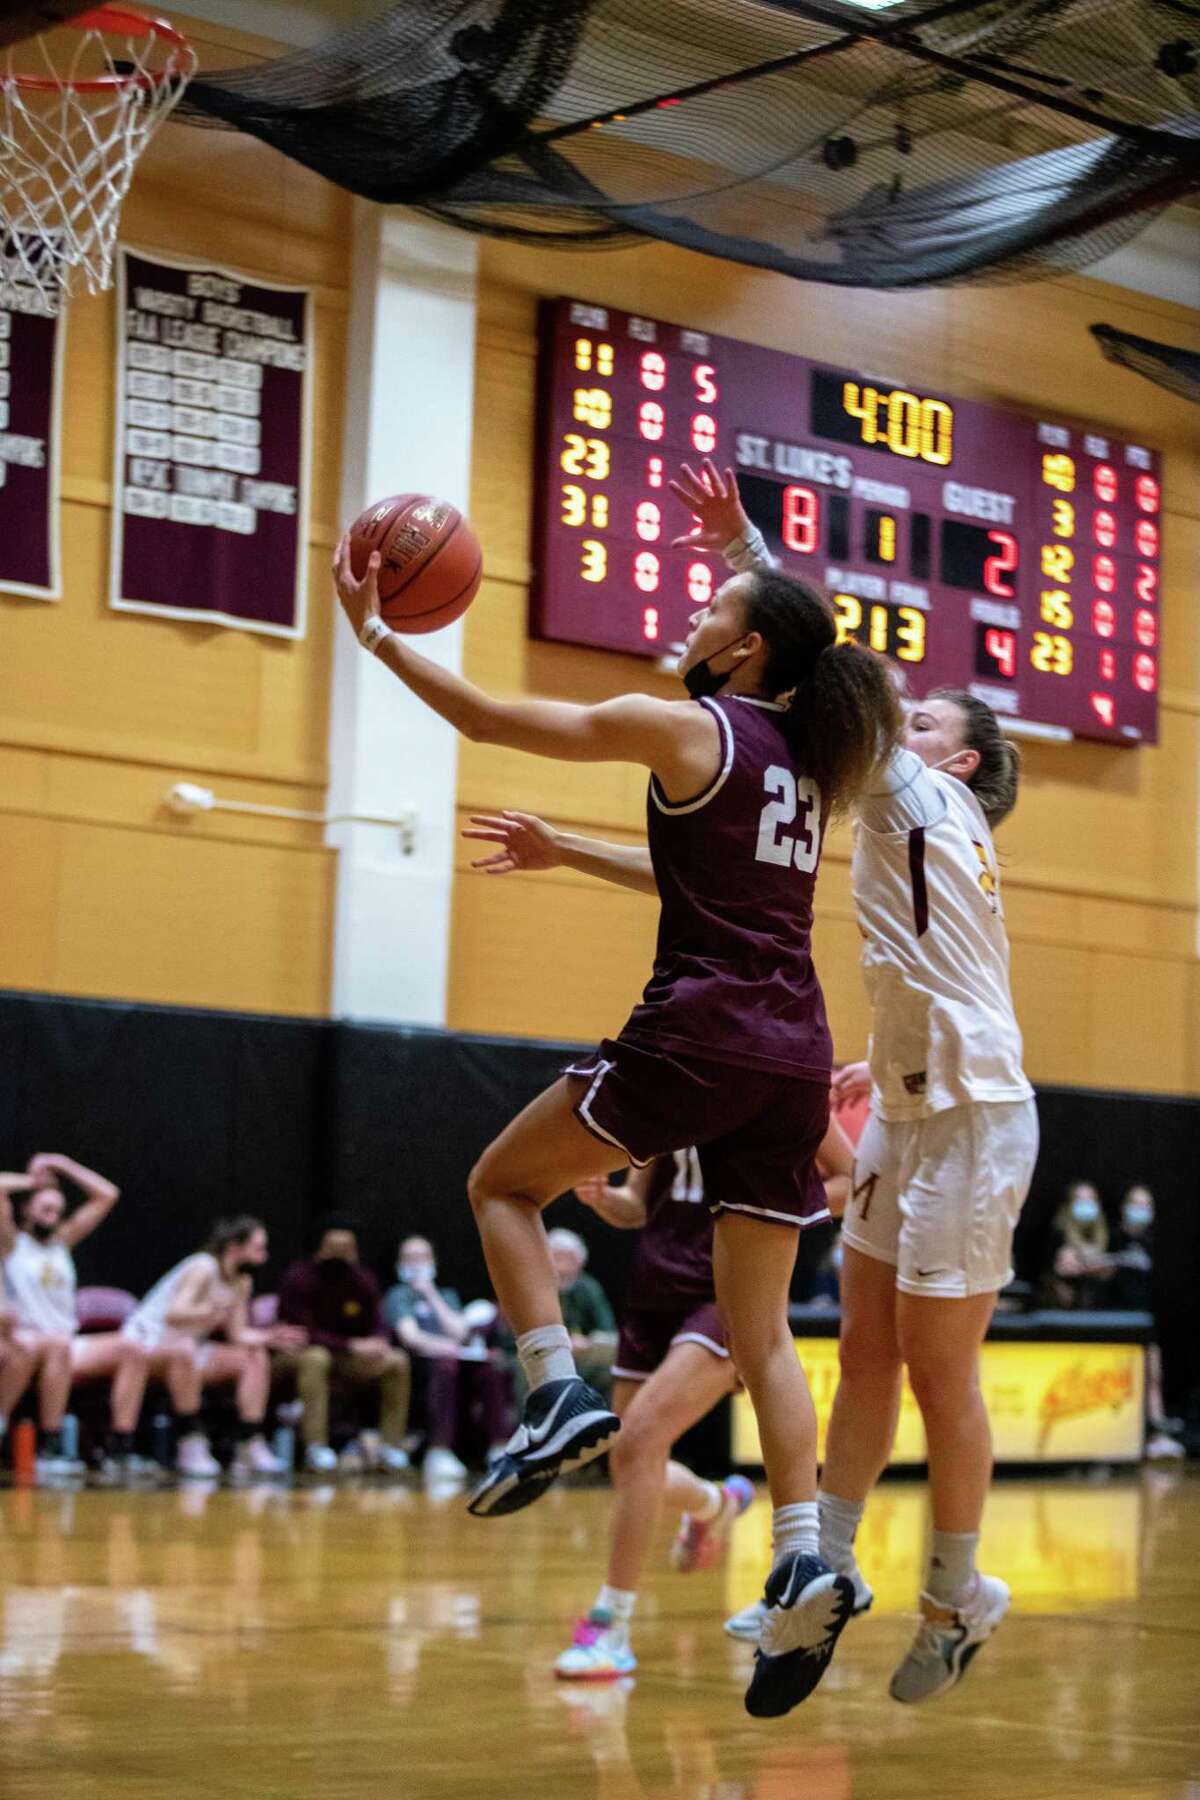 St. Luke’s junior Mackenzie Nelson, of Greenwich, has been named the Gatorade Girls Basketball Player of the Year for Connecticut after averaging 22 points, 4.5 rebounds, 3.5 assists and 5 steals per game. St. Luke’s was 26-1 this season.